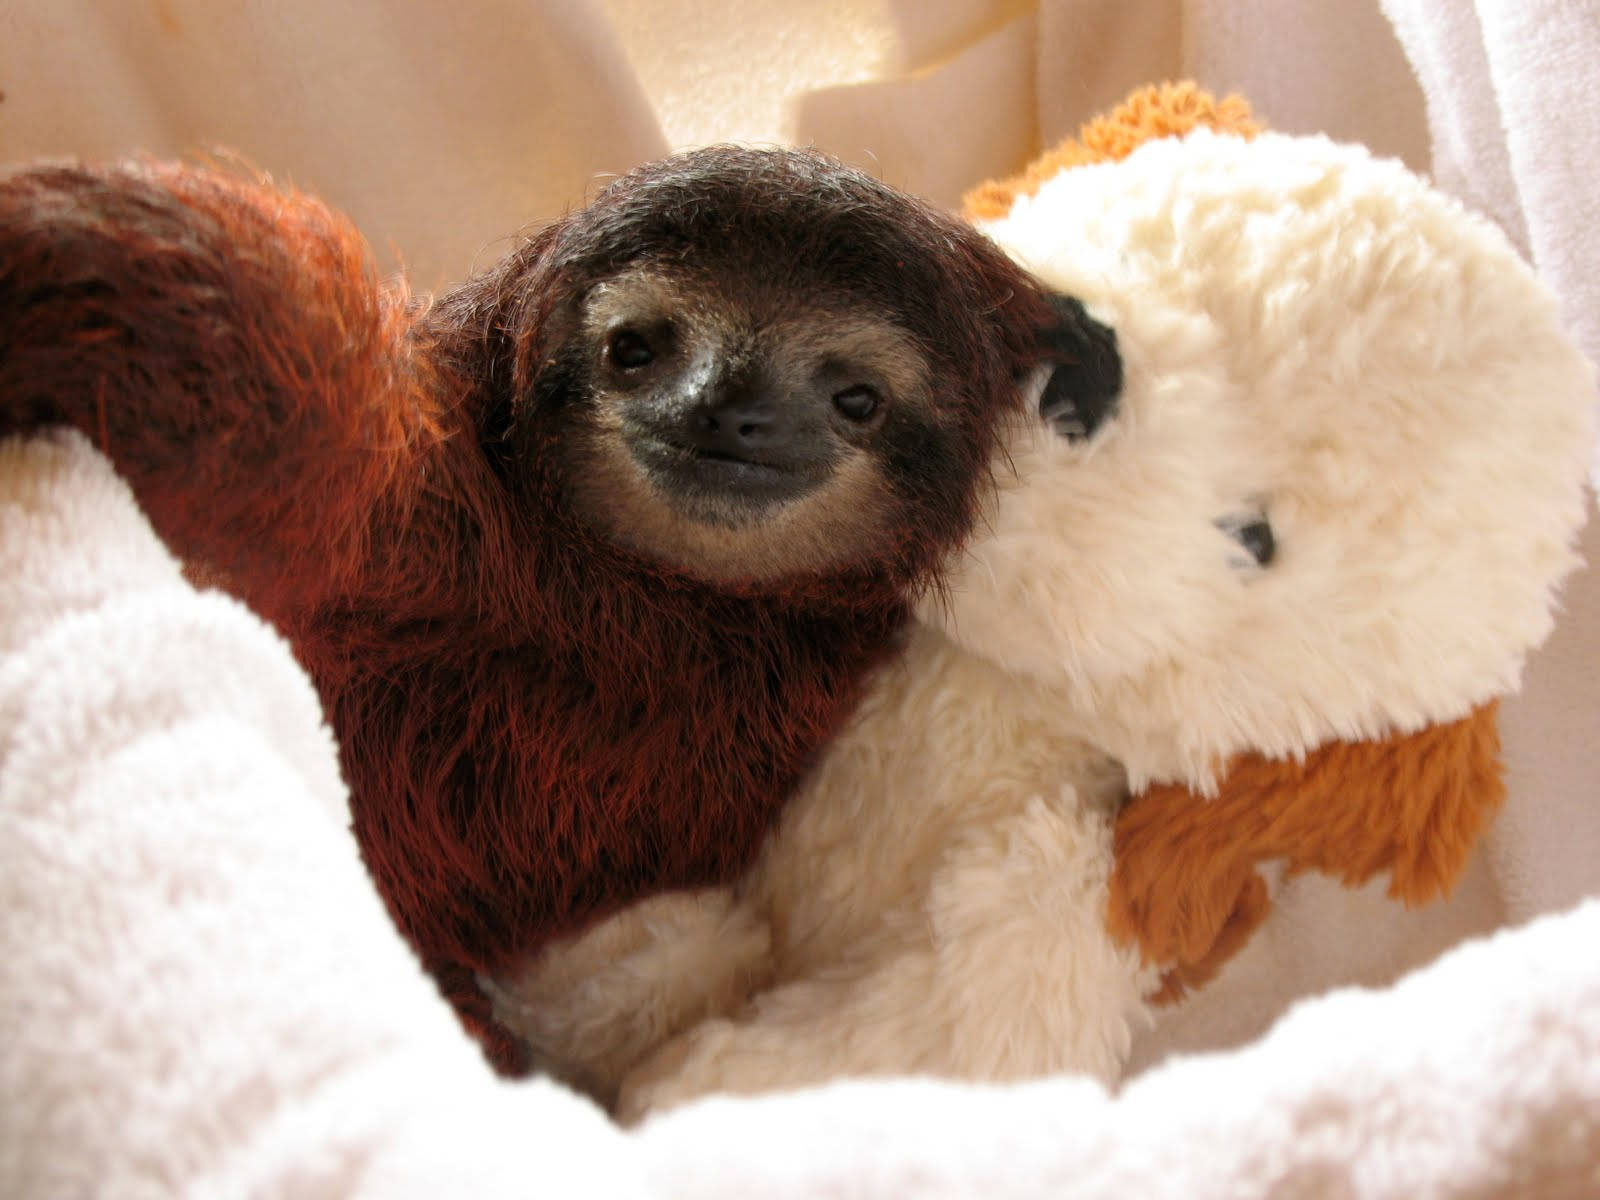 Baby Sloth With A Toy